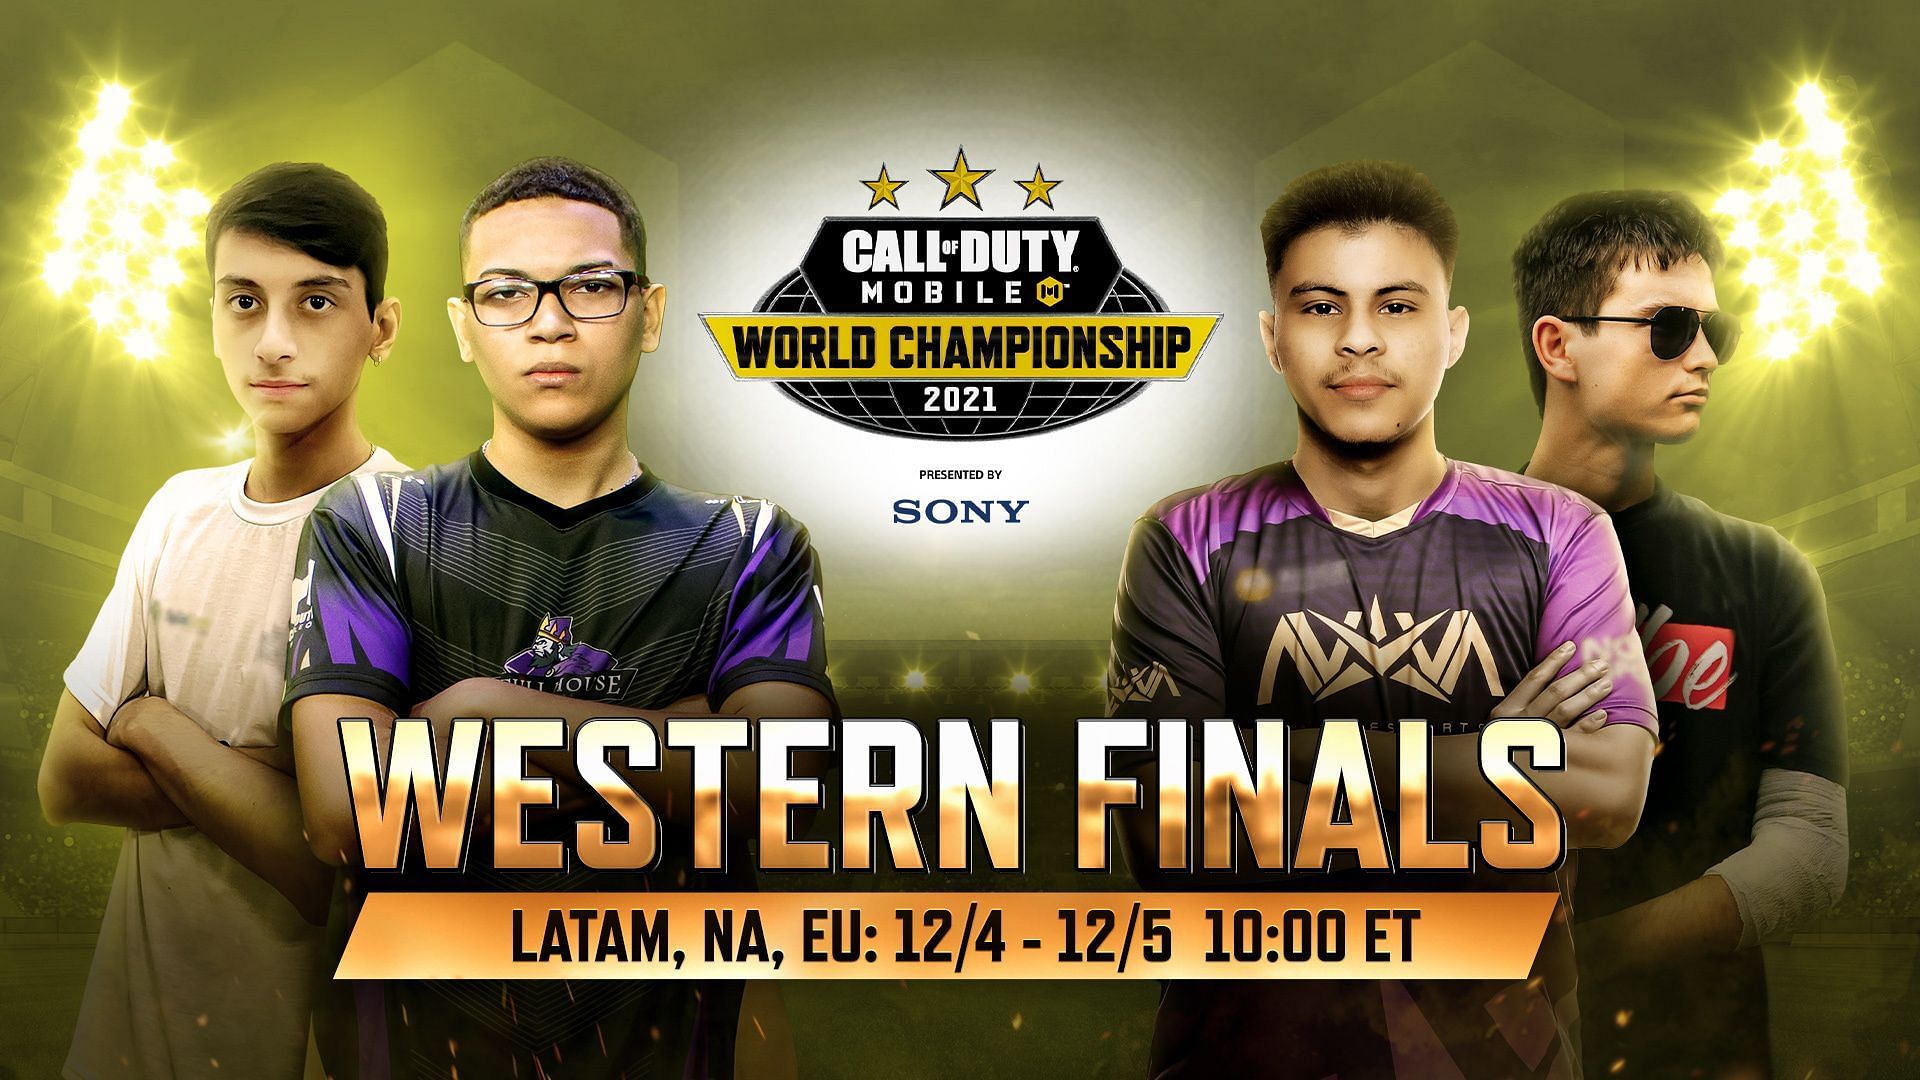 COD Mobile World Championship 2021 West Finals Will kick off on December 4